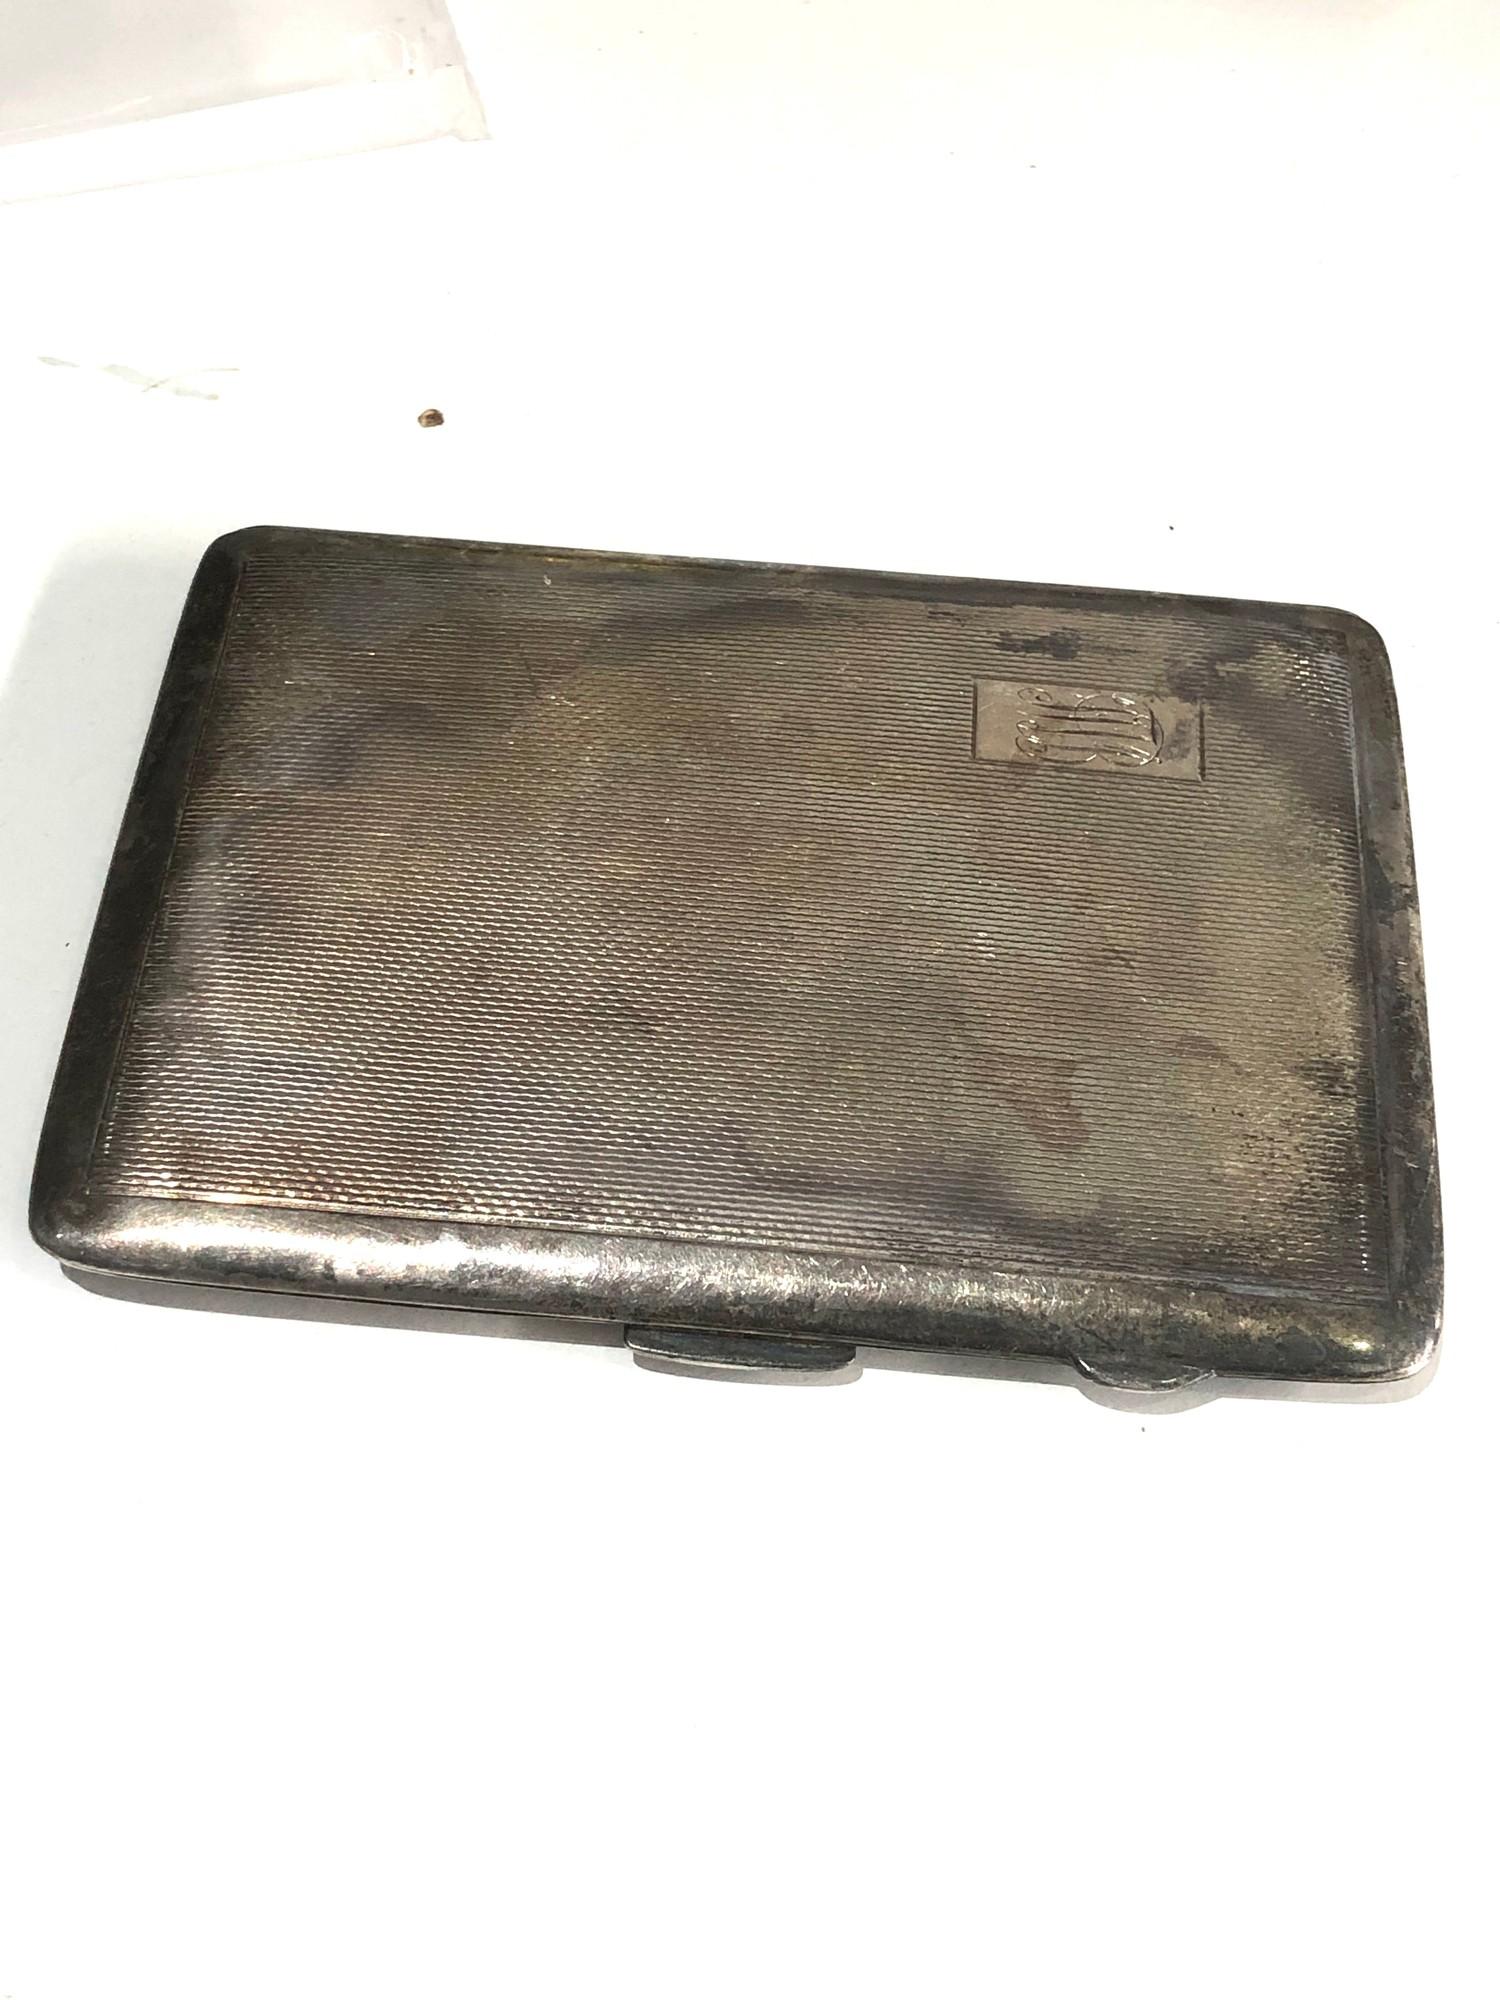 Silver cigarette case weight 130 - Image 2 of 2